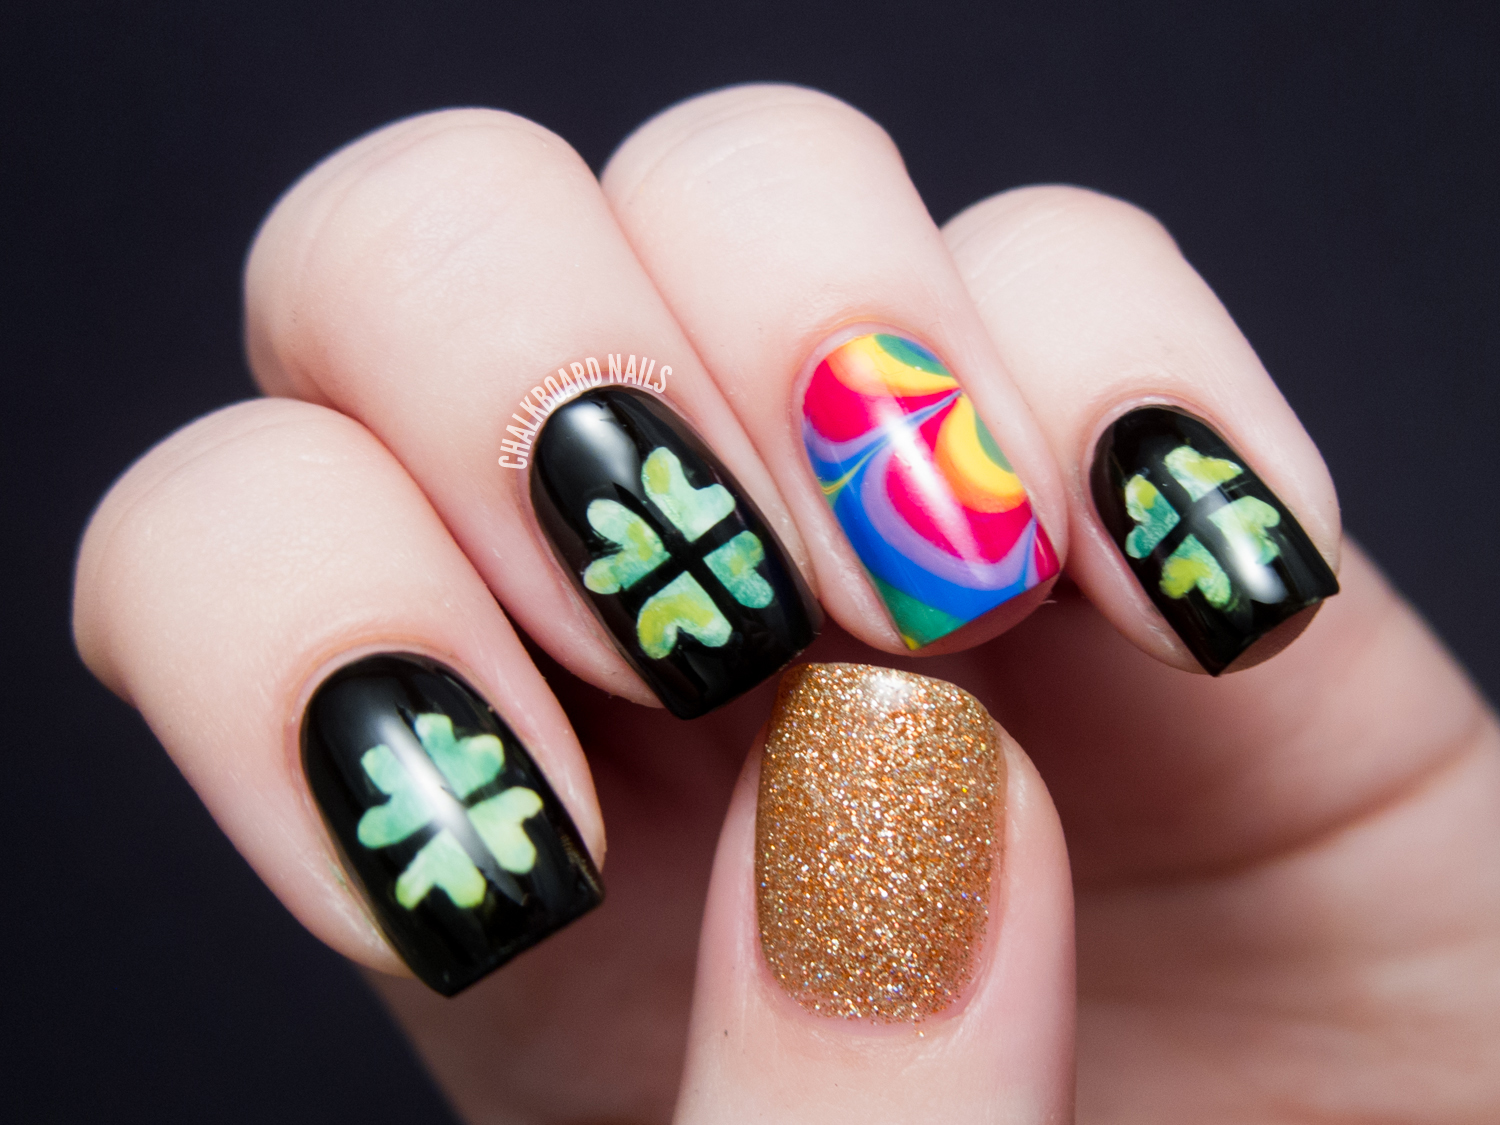 St. Patrick's Day Nail Art with Shamrocks - wide 1